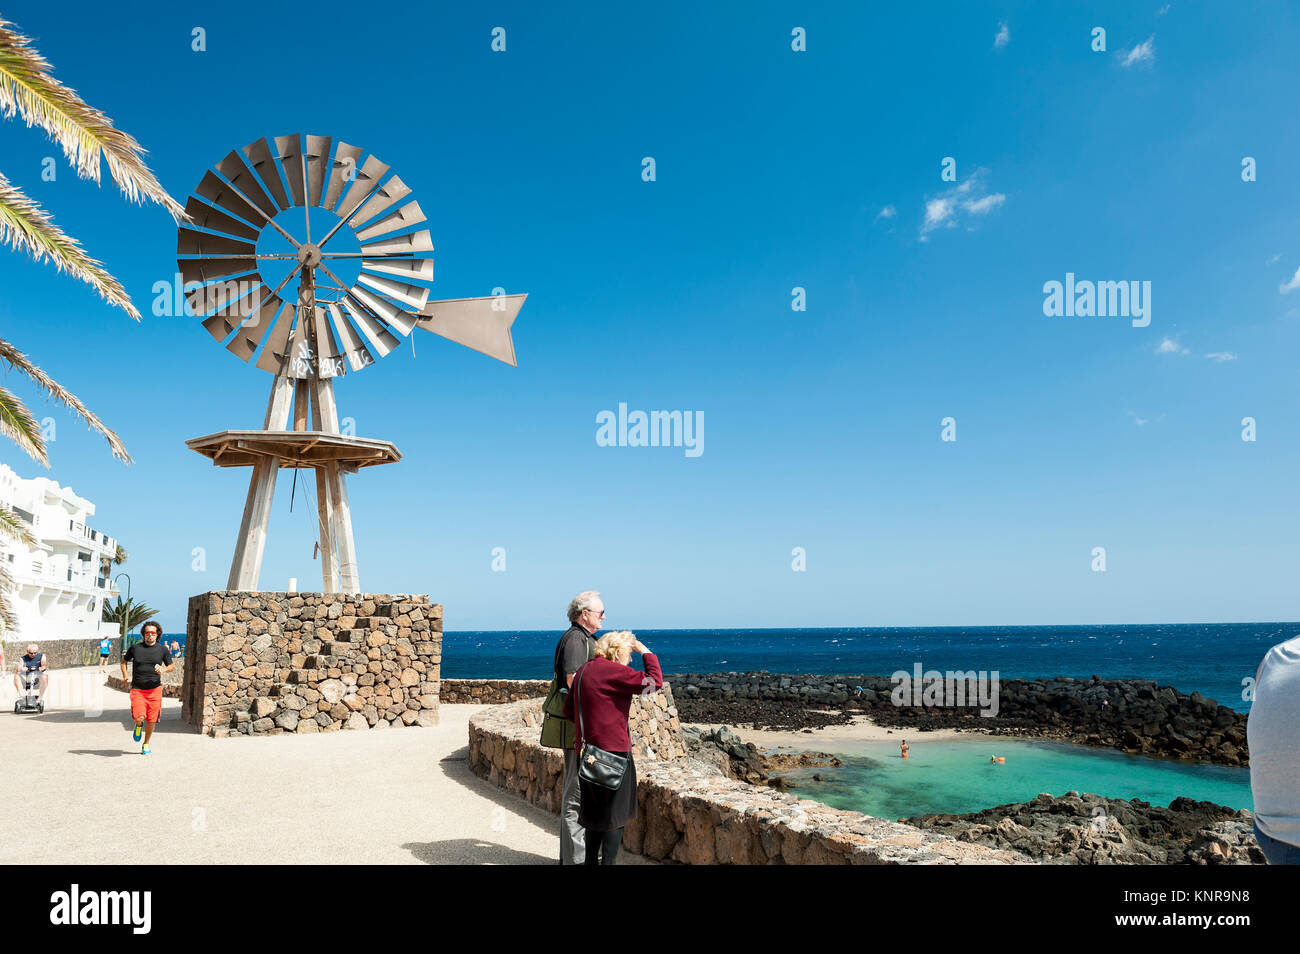 Windmill on a promenade in Costa Teguise, Lanzarote in the Canary Islands, Spain Stock Photo